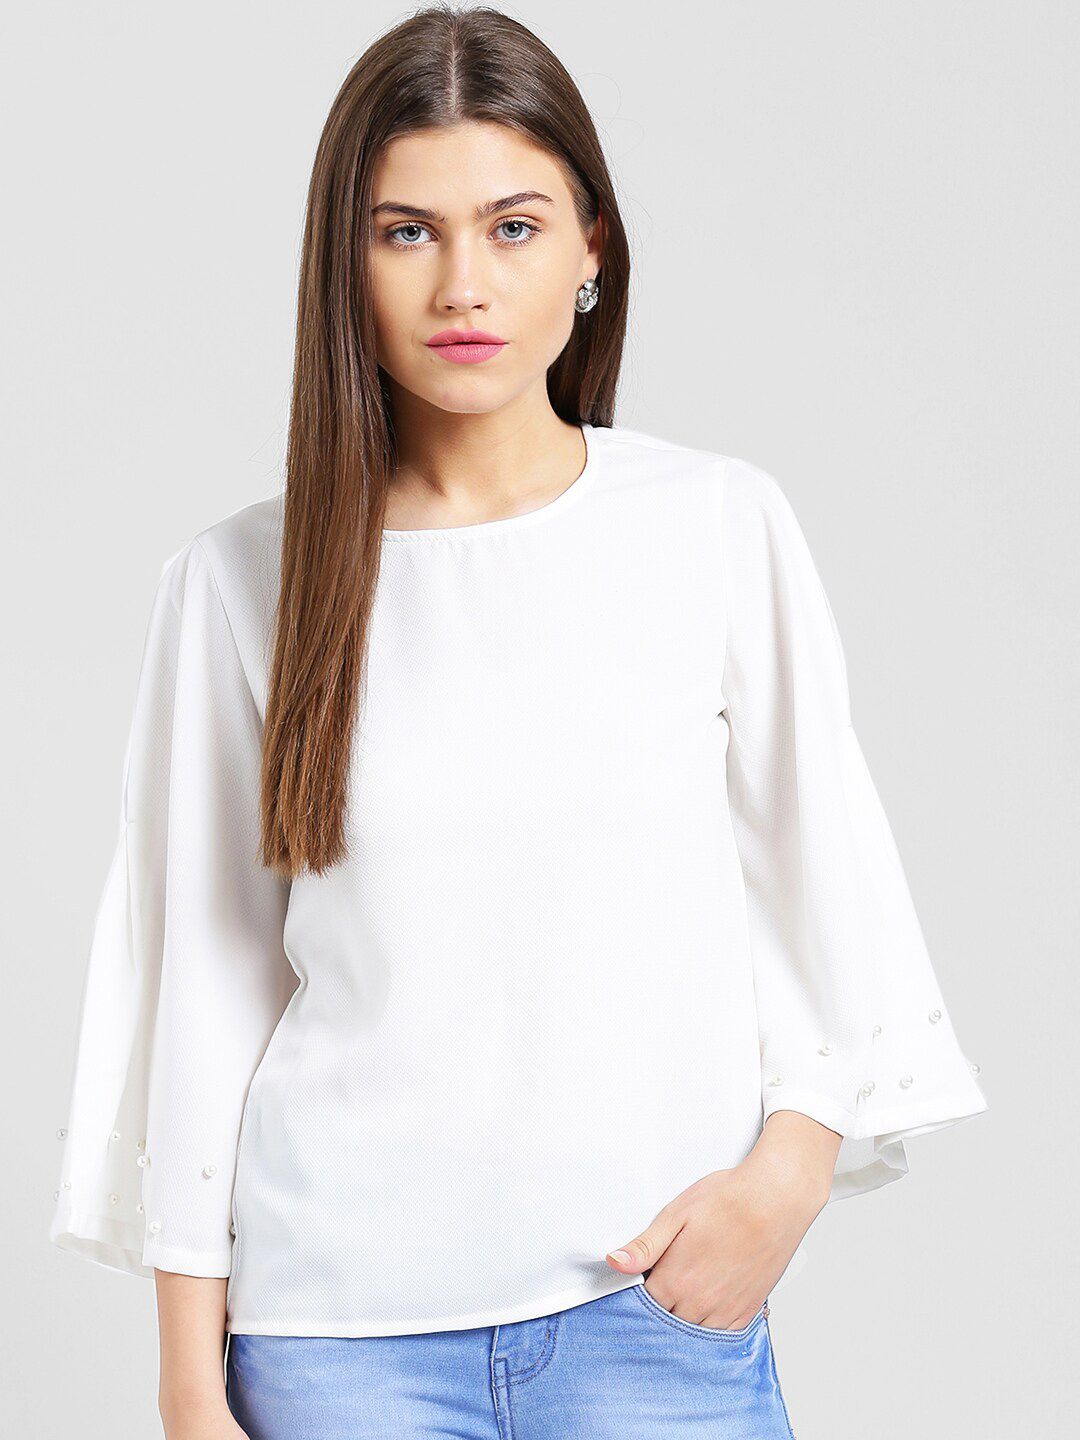 Be Indi Women White Embellished Top Price in India